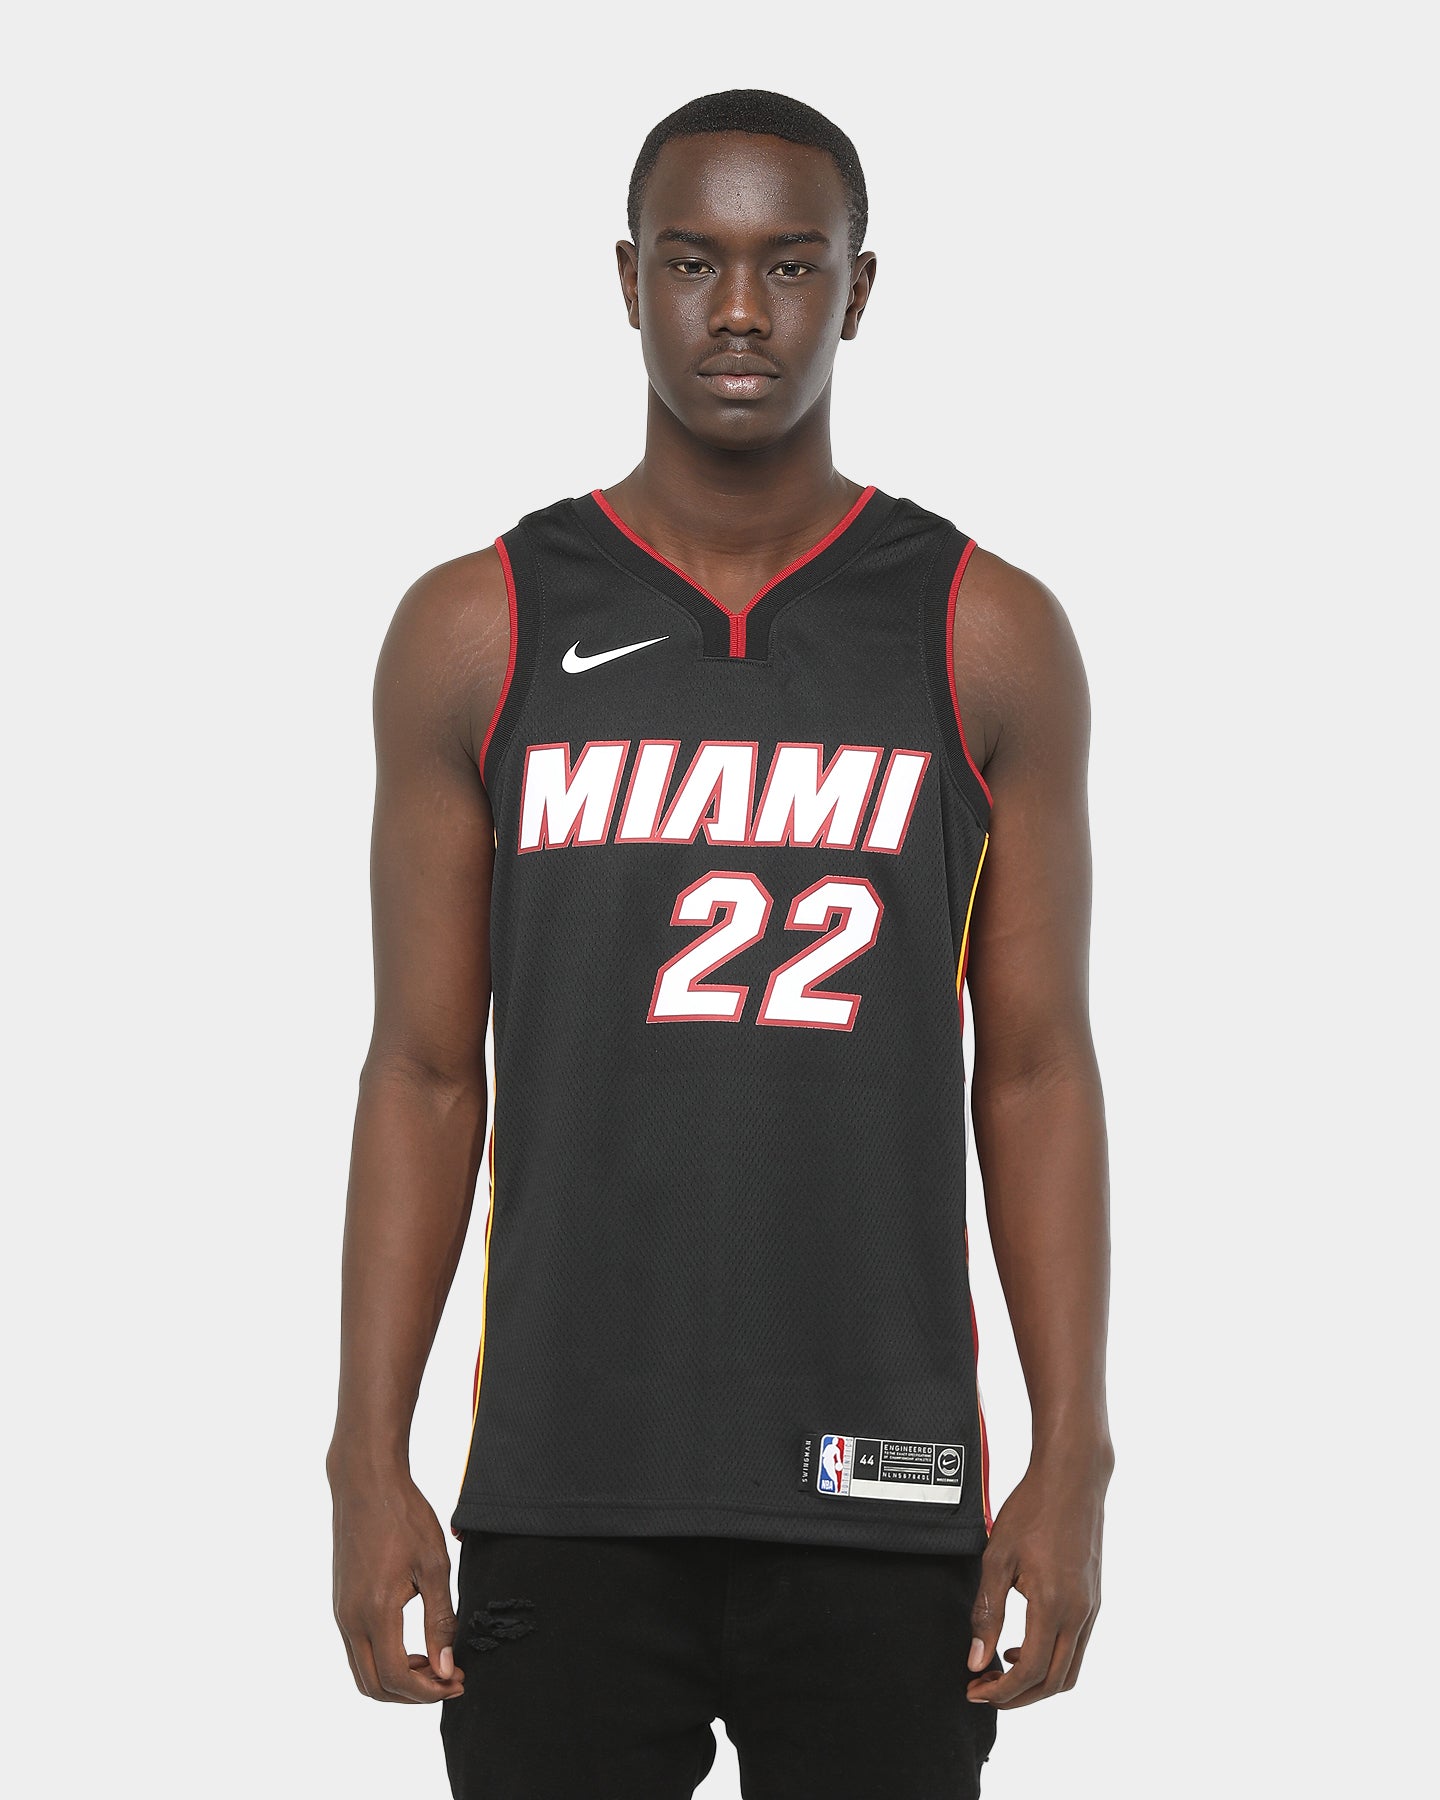 jimmy butler jersey red